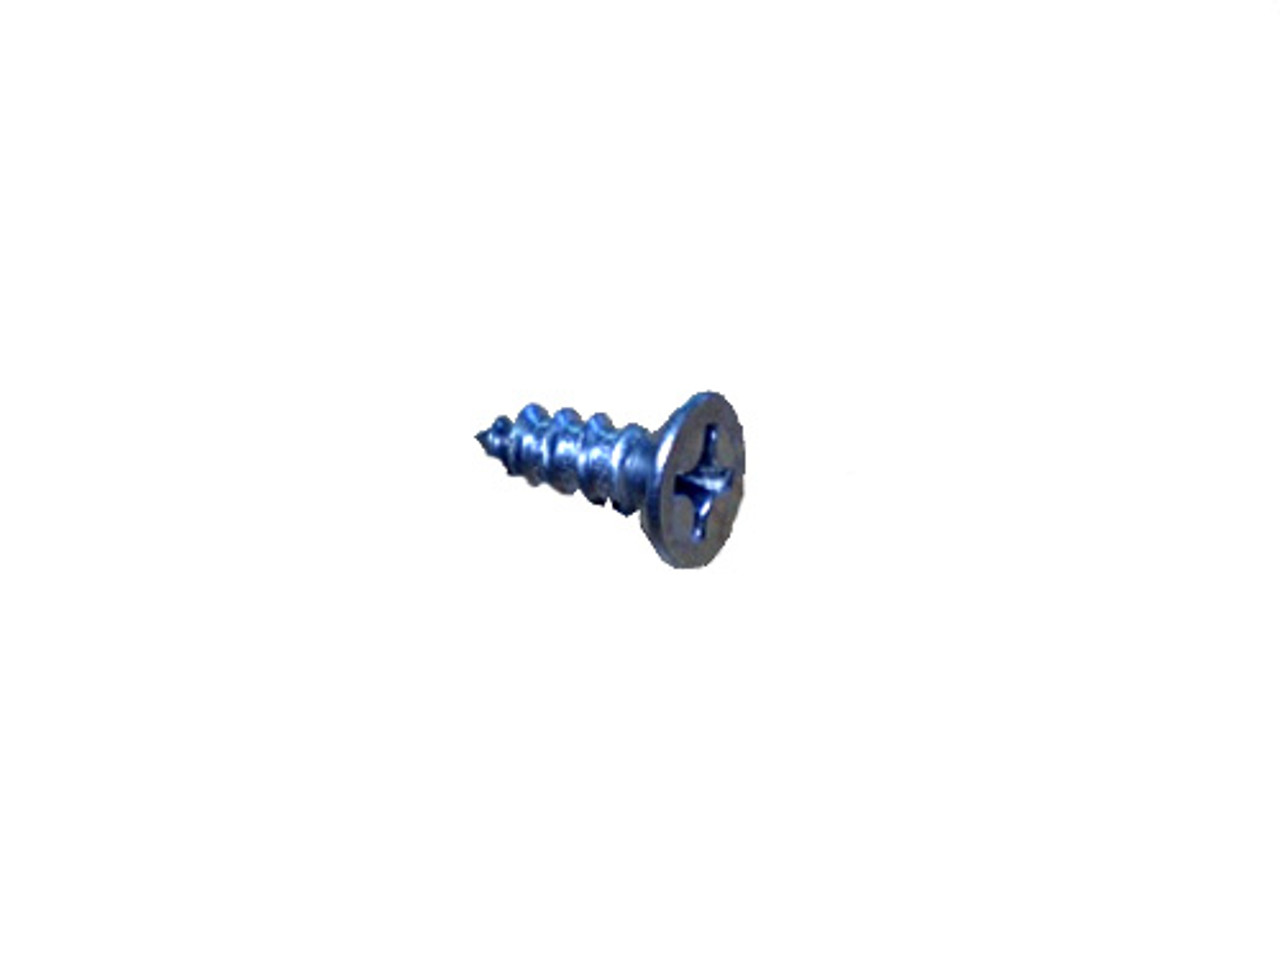 Master Spa - X804310 - Philips Head Stainless Steel Screw for Stainless Steel Swim Tether Base Mount - Side View